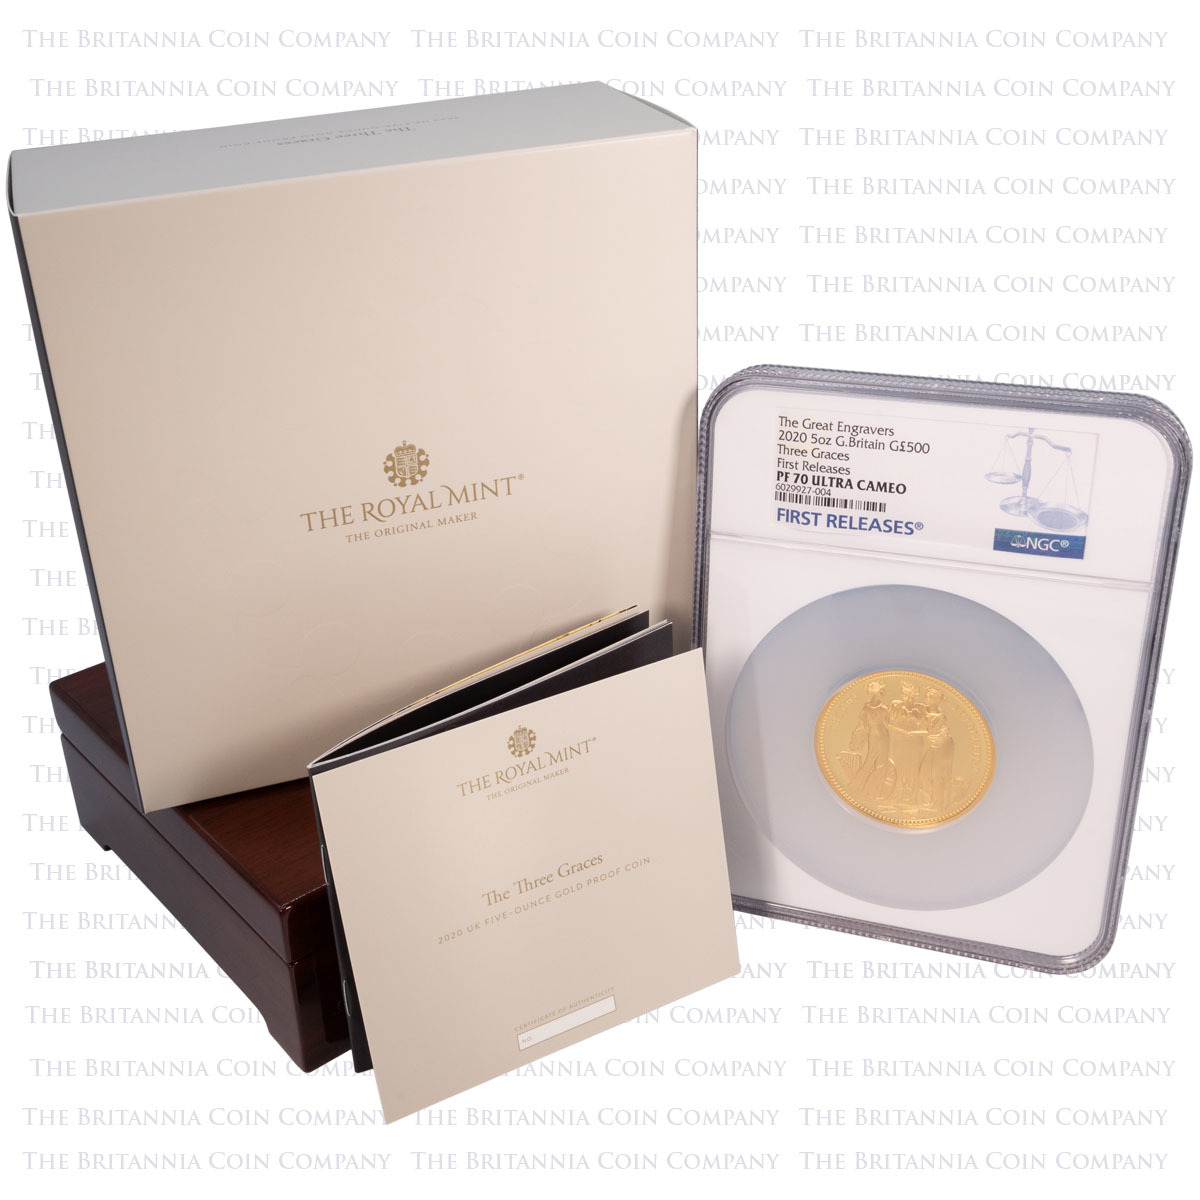 UK20WW5G 2020 Great Engravers Three Graces Five Ounce Gold Proof PF 70 Ultra Cameo First Releases With Box